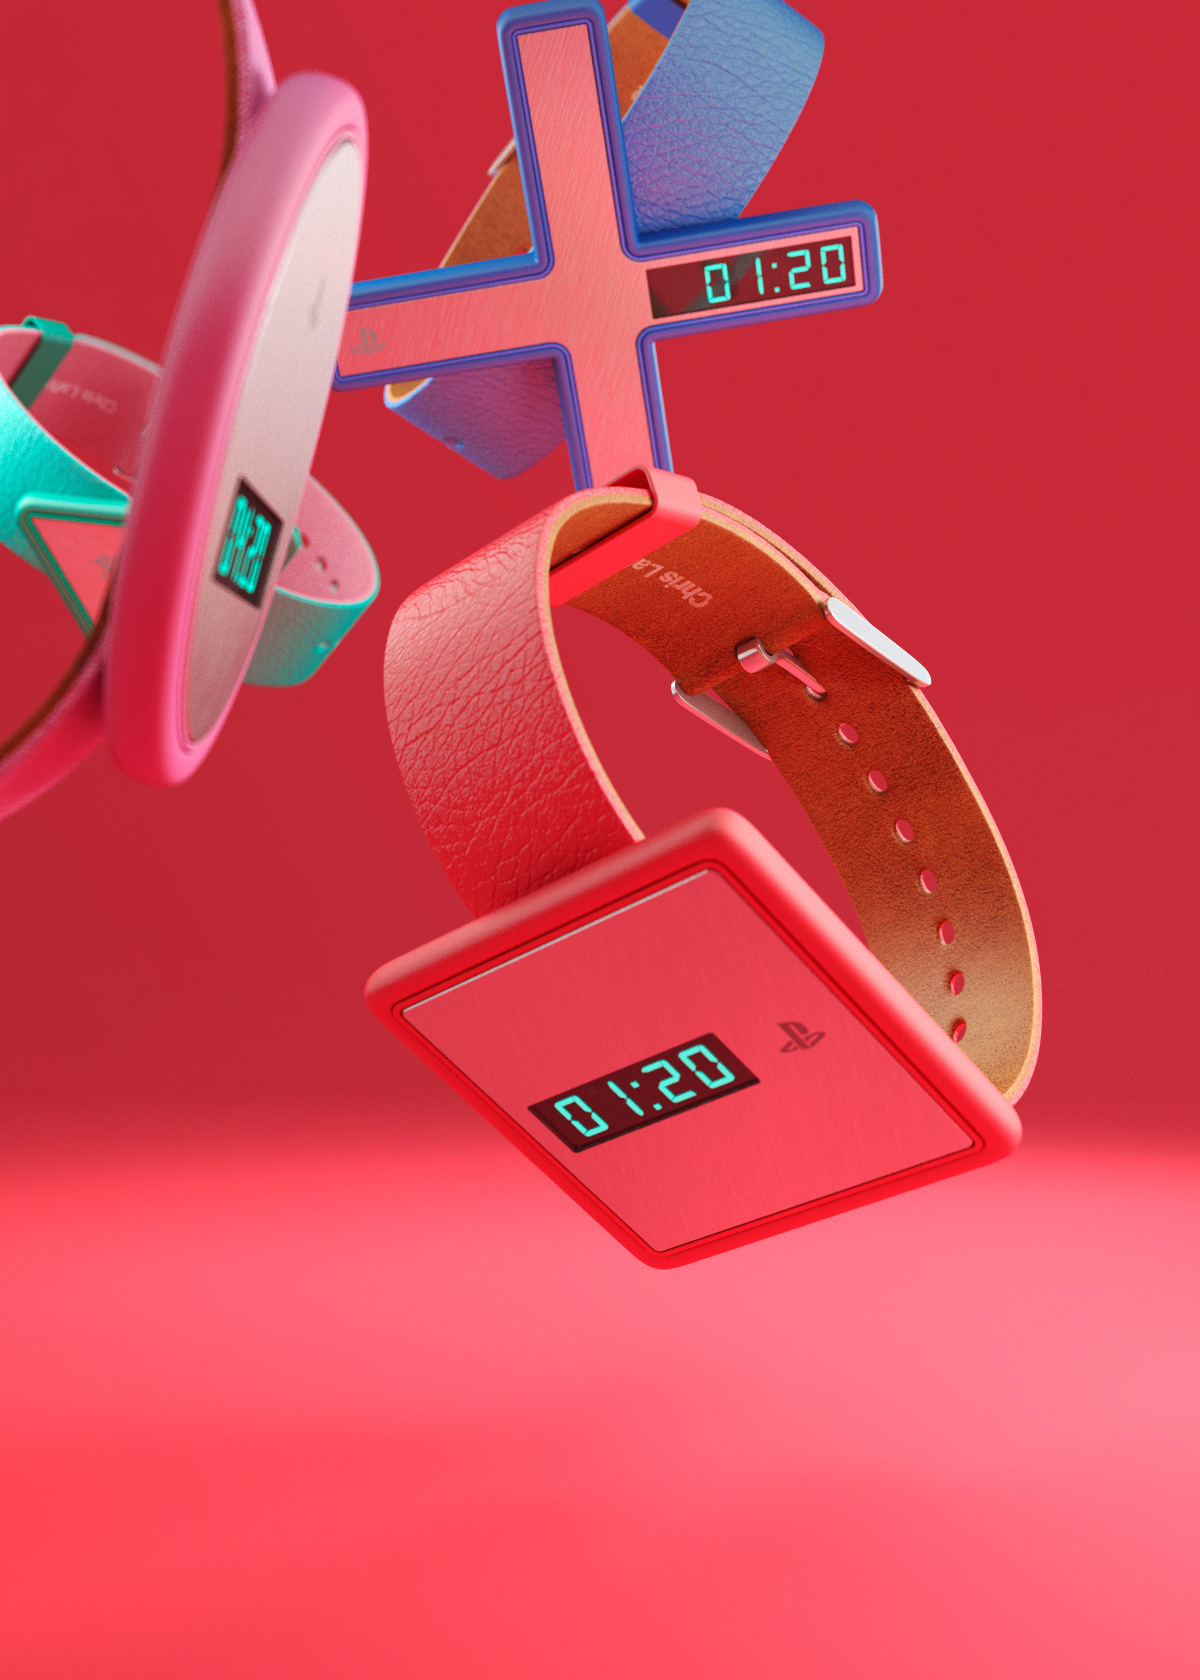 colour pop bright lettering characters 3D CGI design Watches Love 3D Type 3D typography